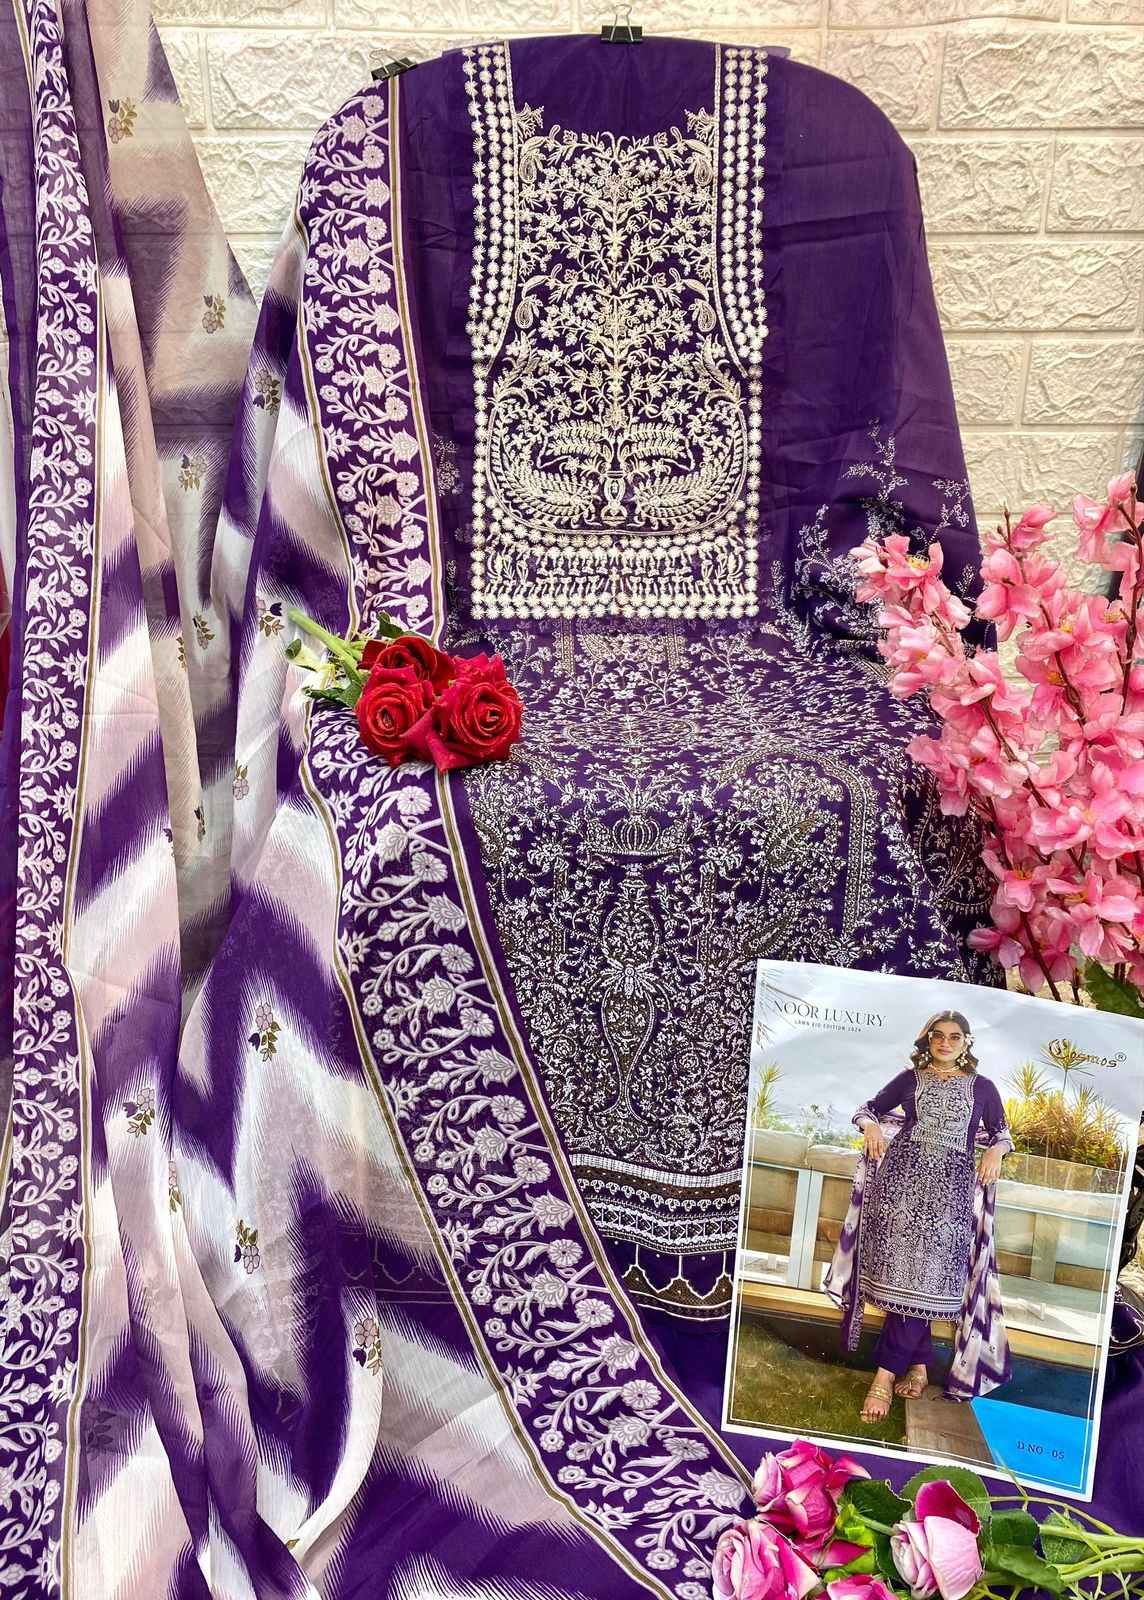 Cosmos Noor Luxury Lawn Eid Edition 2024 Collection Dress Material (6 Pc Catalog)